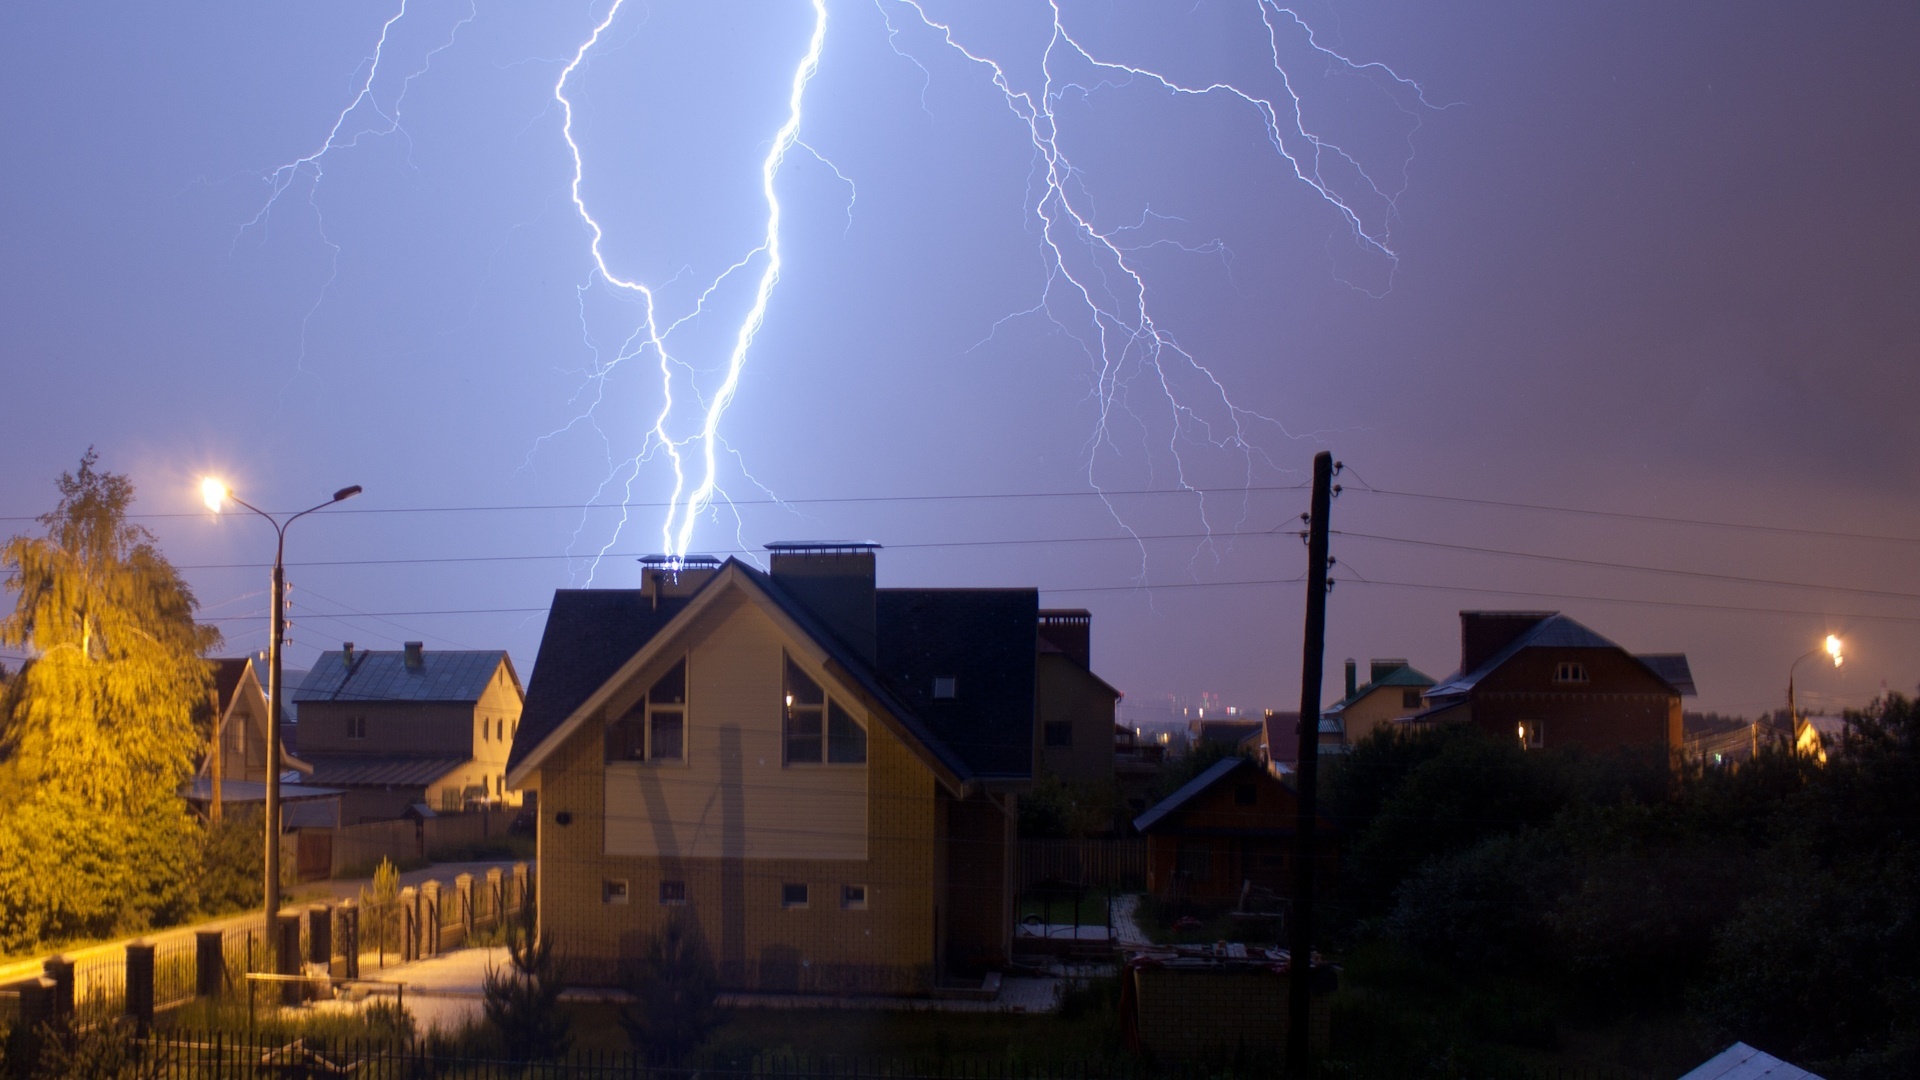 How Can I Prevent My Home from Being Damaged by Lightning Strikes and Power Surges?